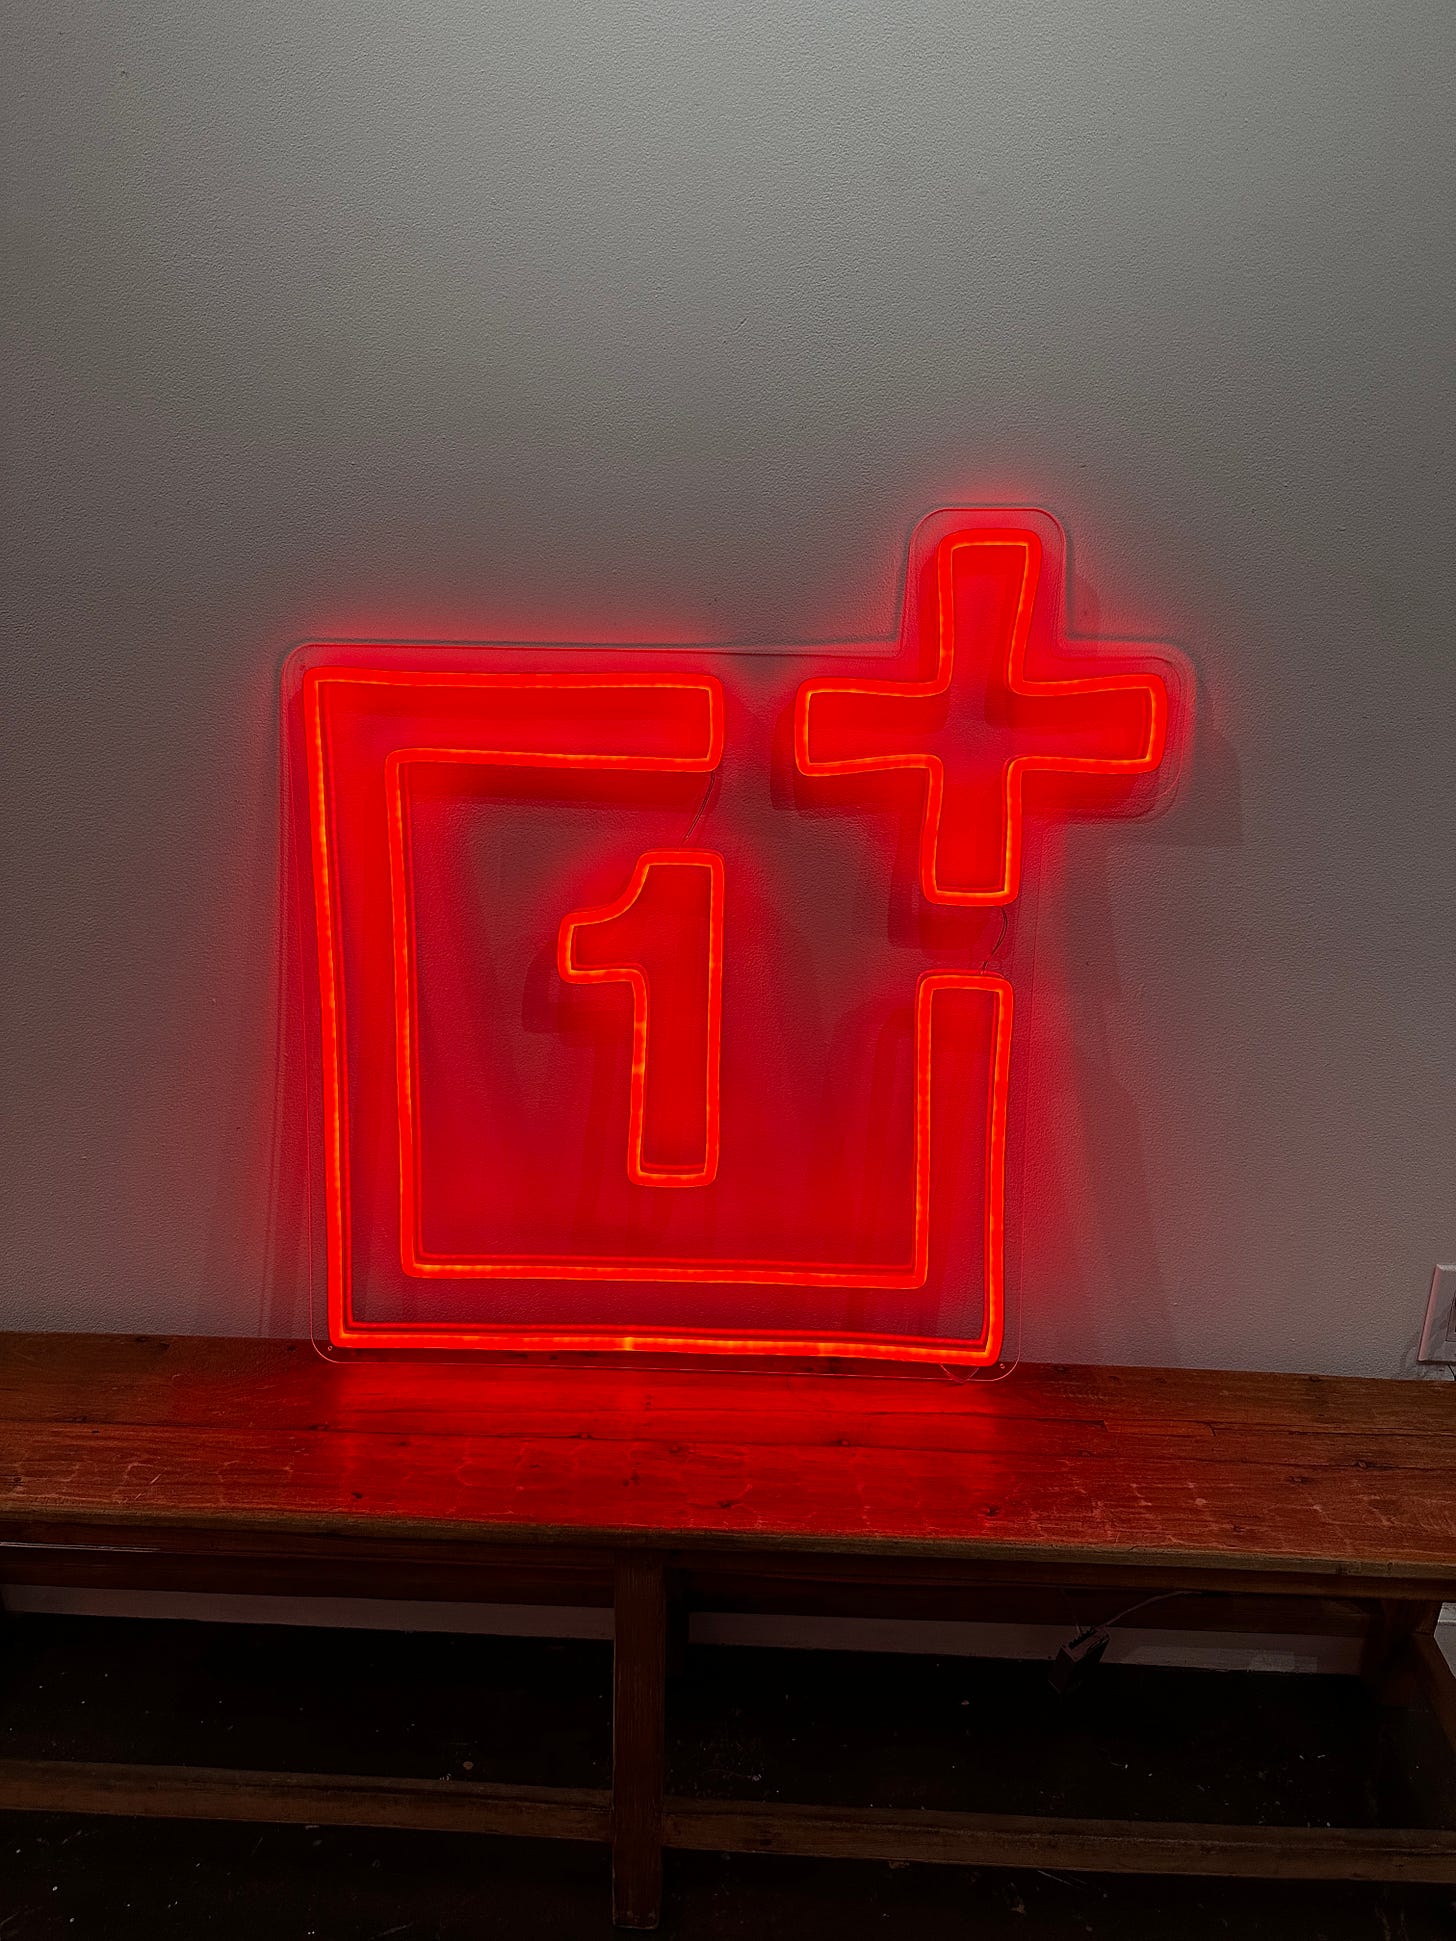 A neon OnePlus logo sign.